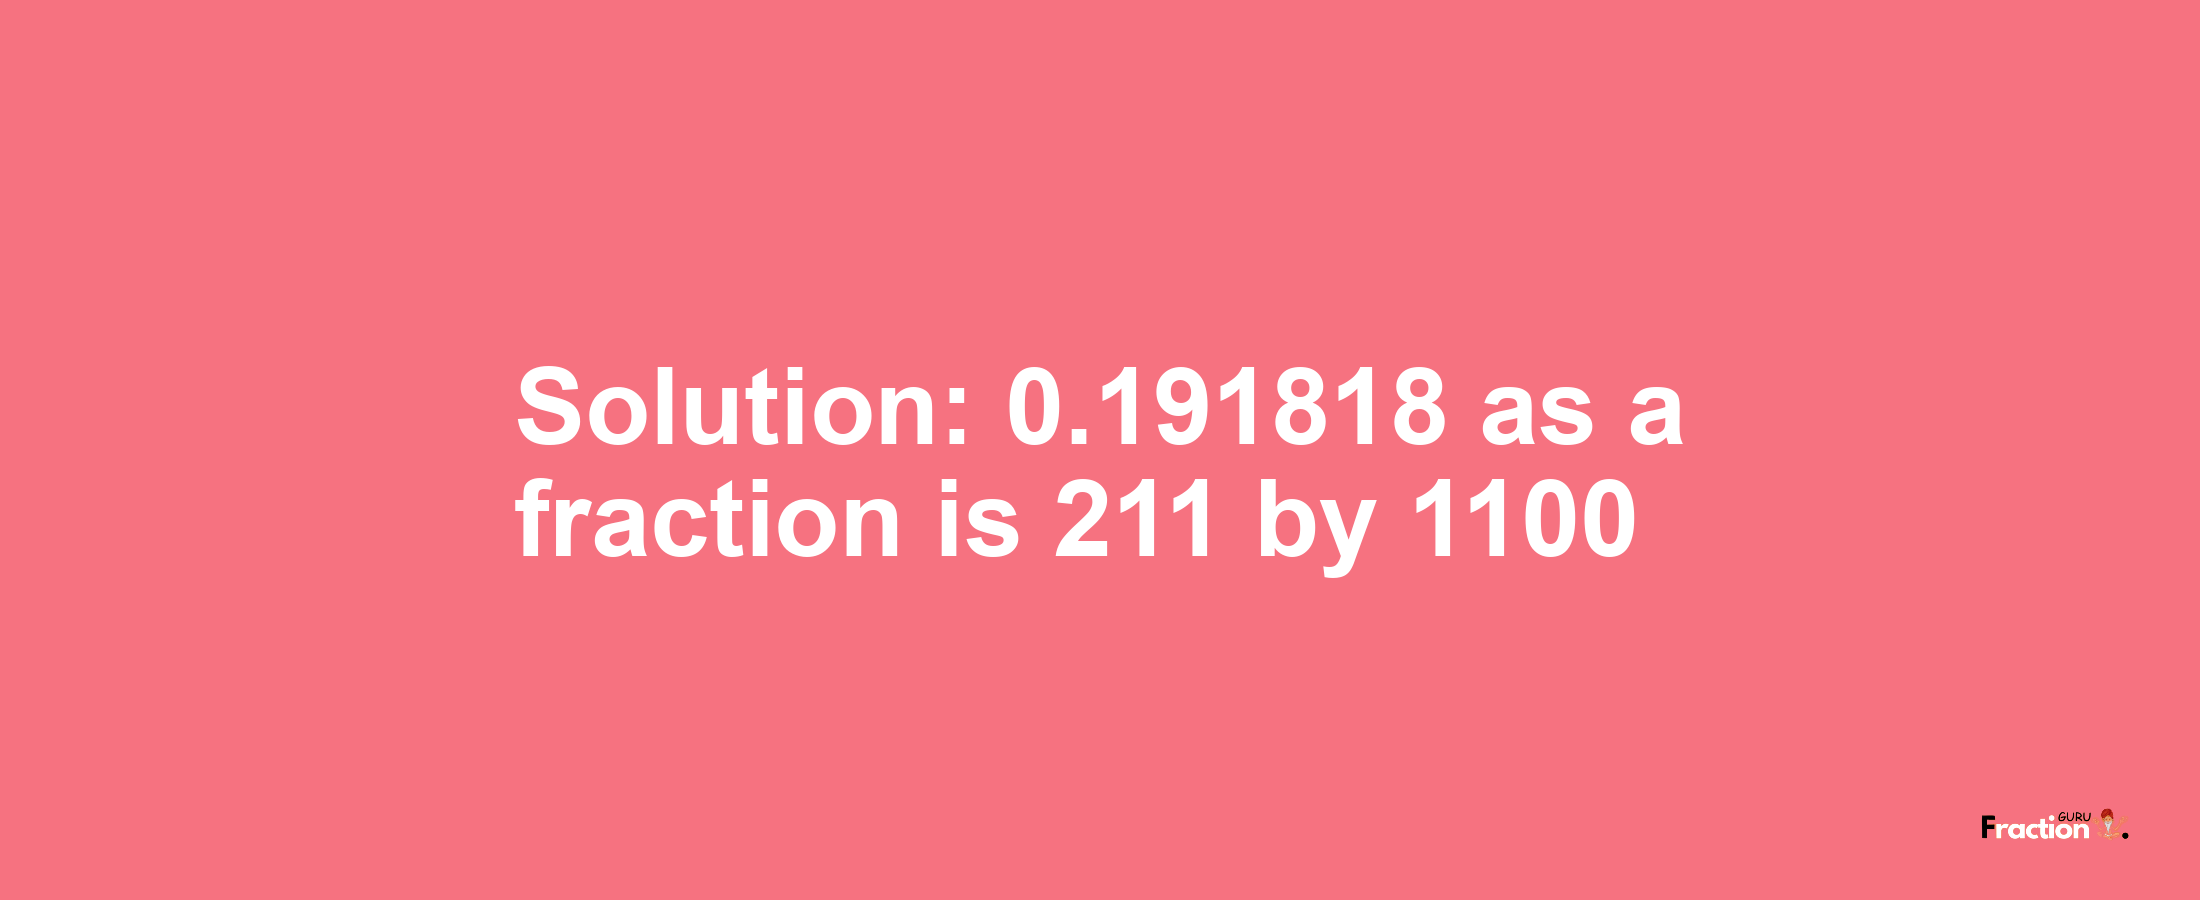 Solution:0.191818 as a fraction is 211/1100